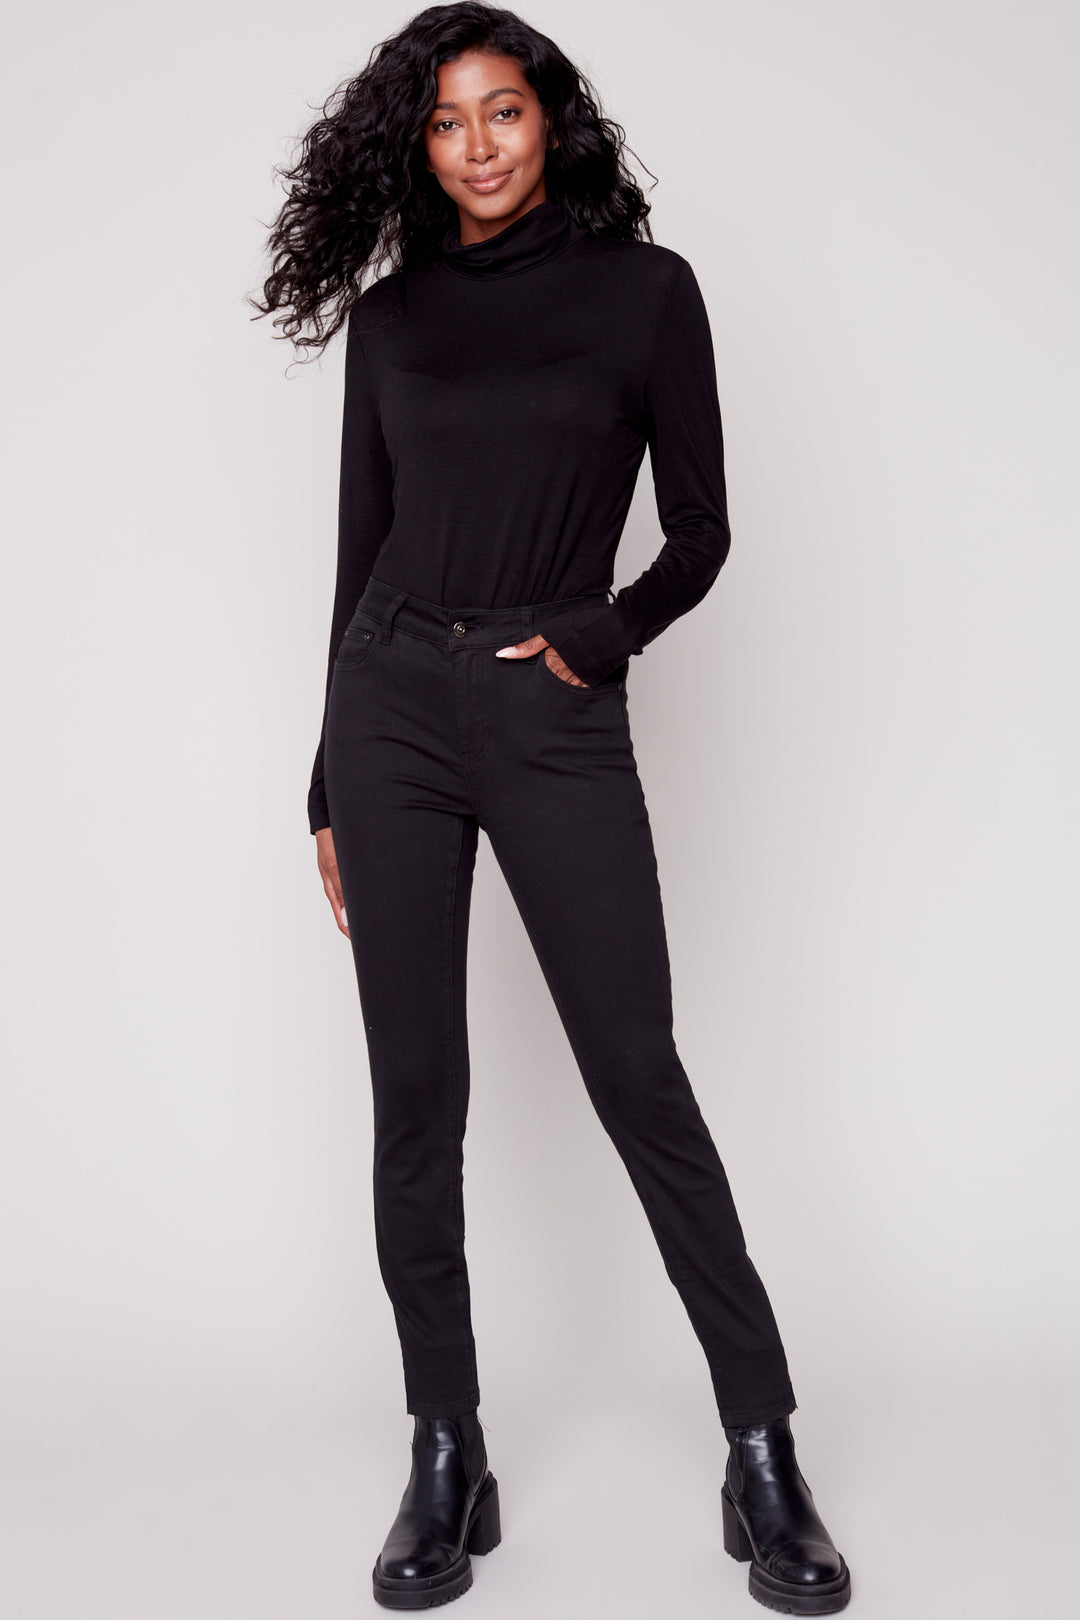 Boasting a side zipper for fashionable detail, these timeless jeans are ready for any crowd. 